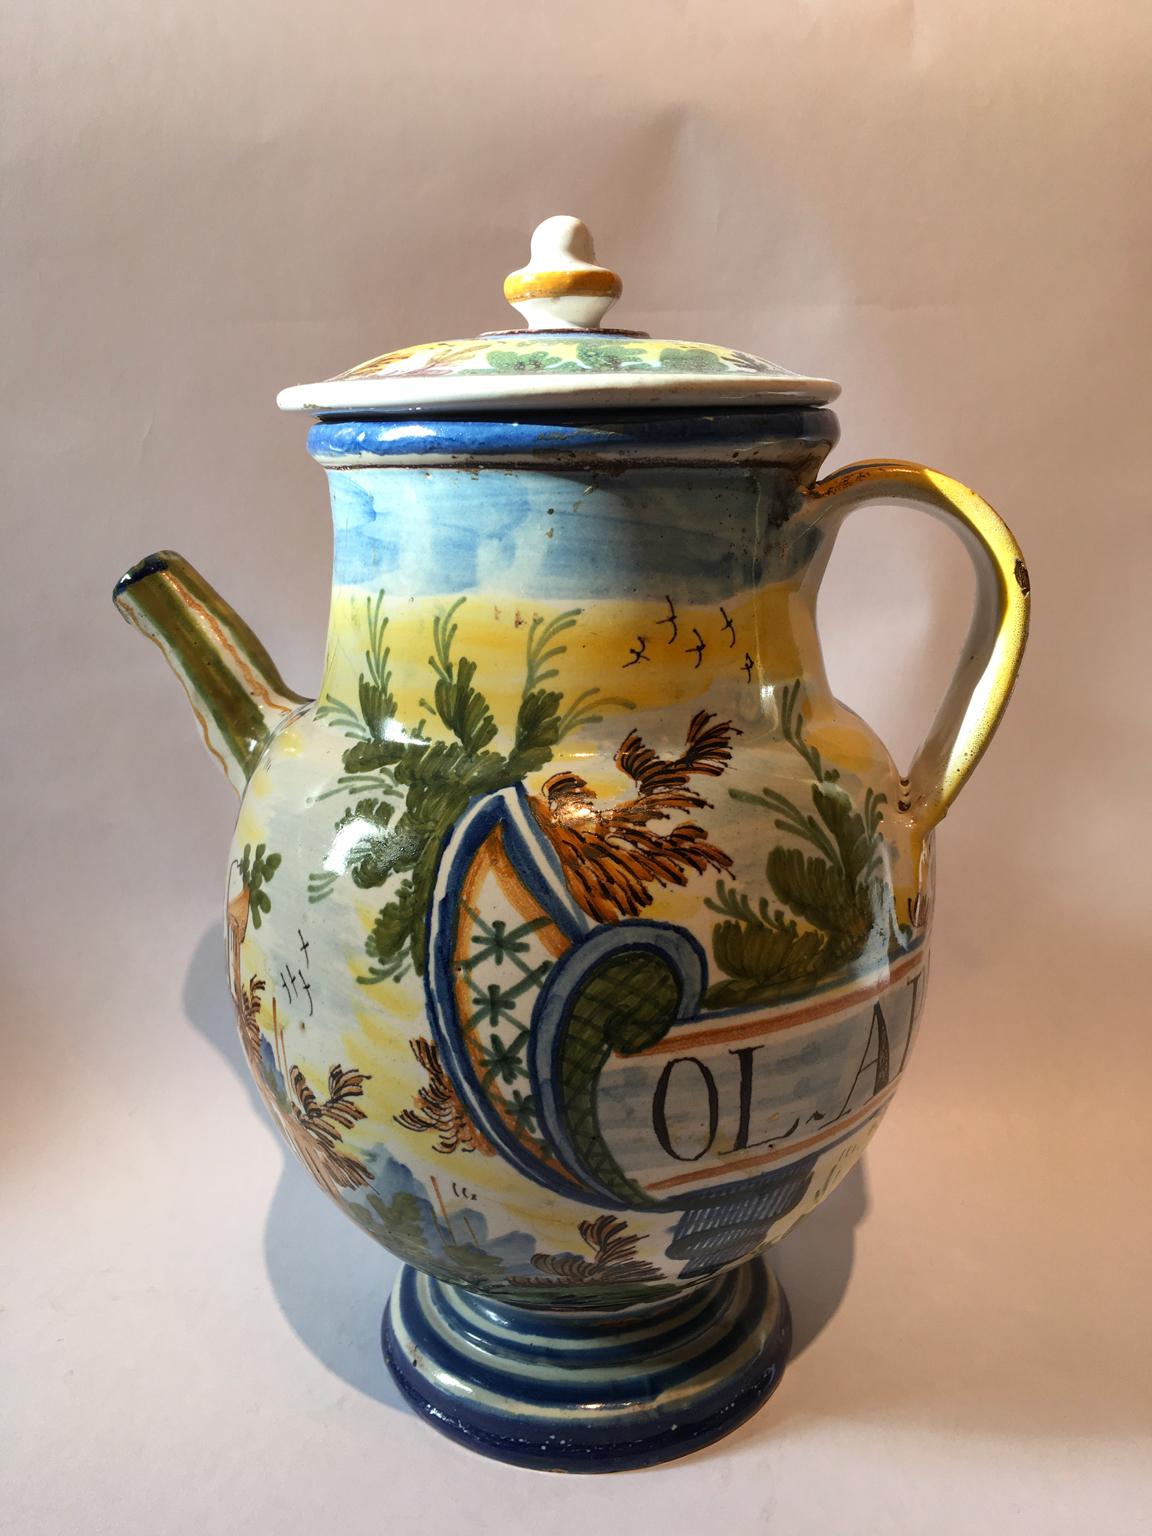 This beautiful ceramic caraf, was utilized in a Pharmacy to contain erbs and spices infusions.
The piece shows all the signs of the time, but it remains a fascinating object. Original from Eastern Italy, Veneto.
Handcrafted, hand painted, words in